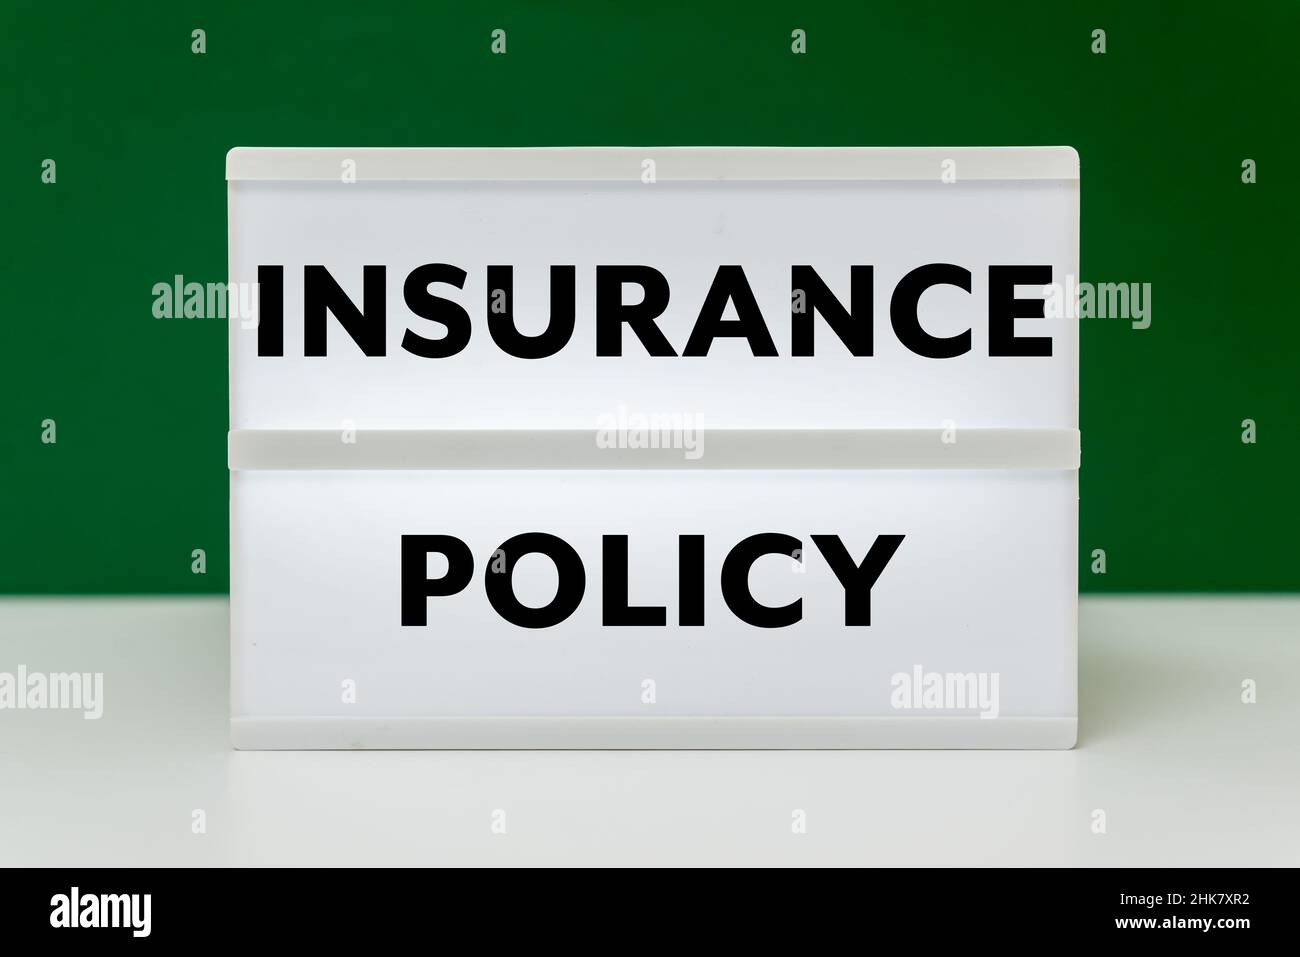 Insurance Policy text on green background Stock Photo